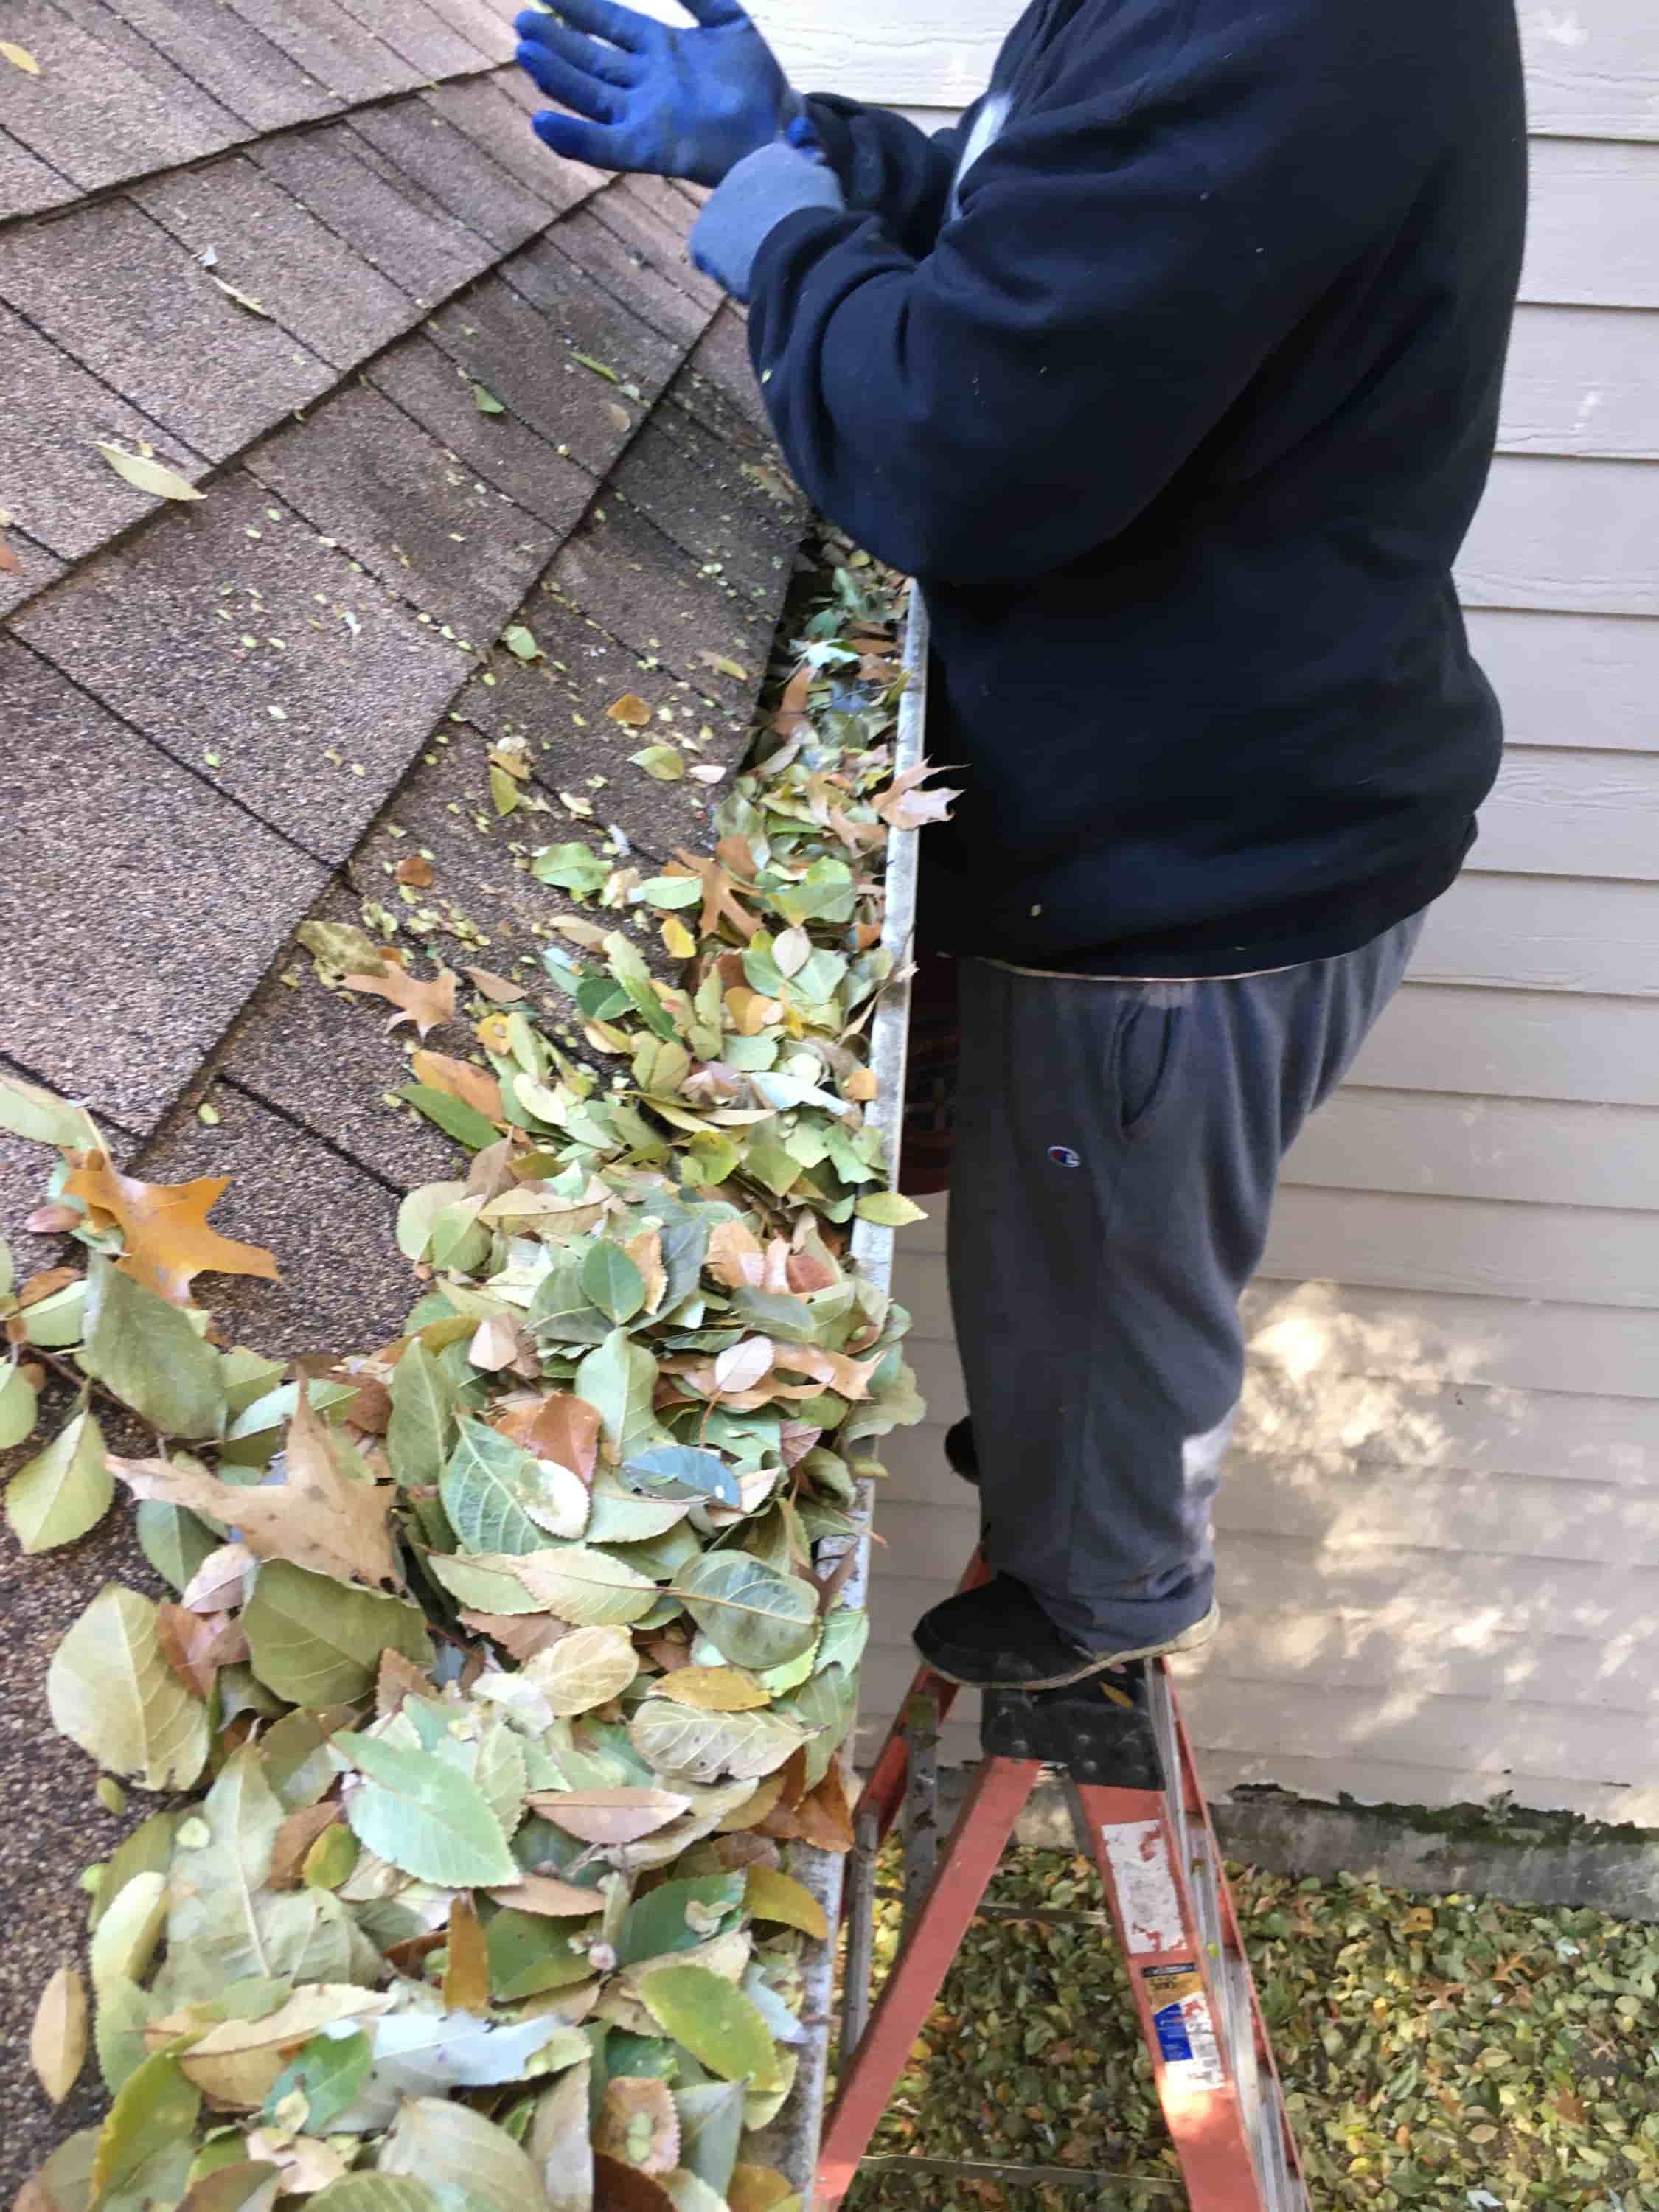 when should i clean my gutters